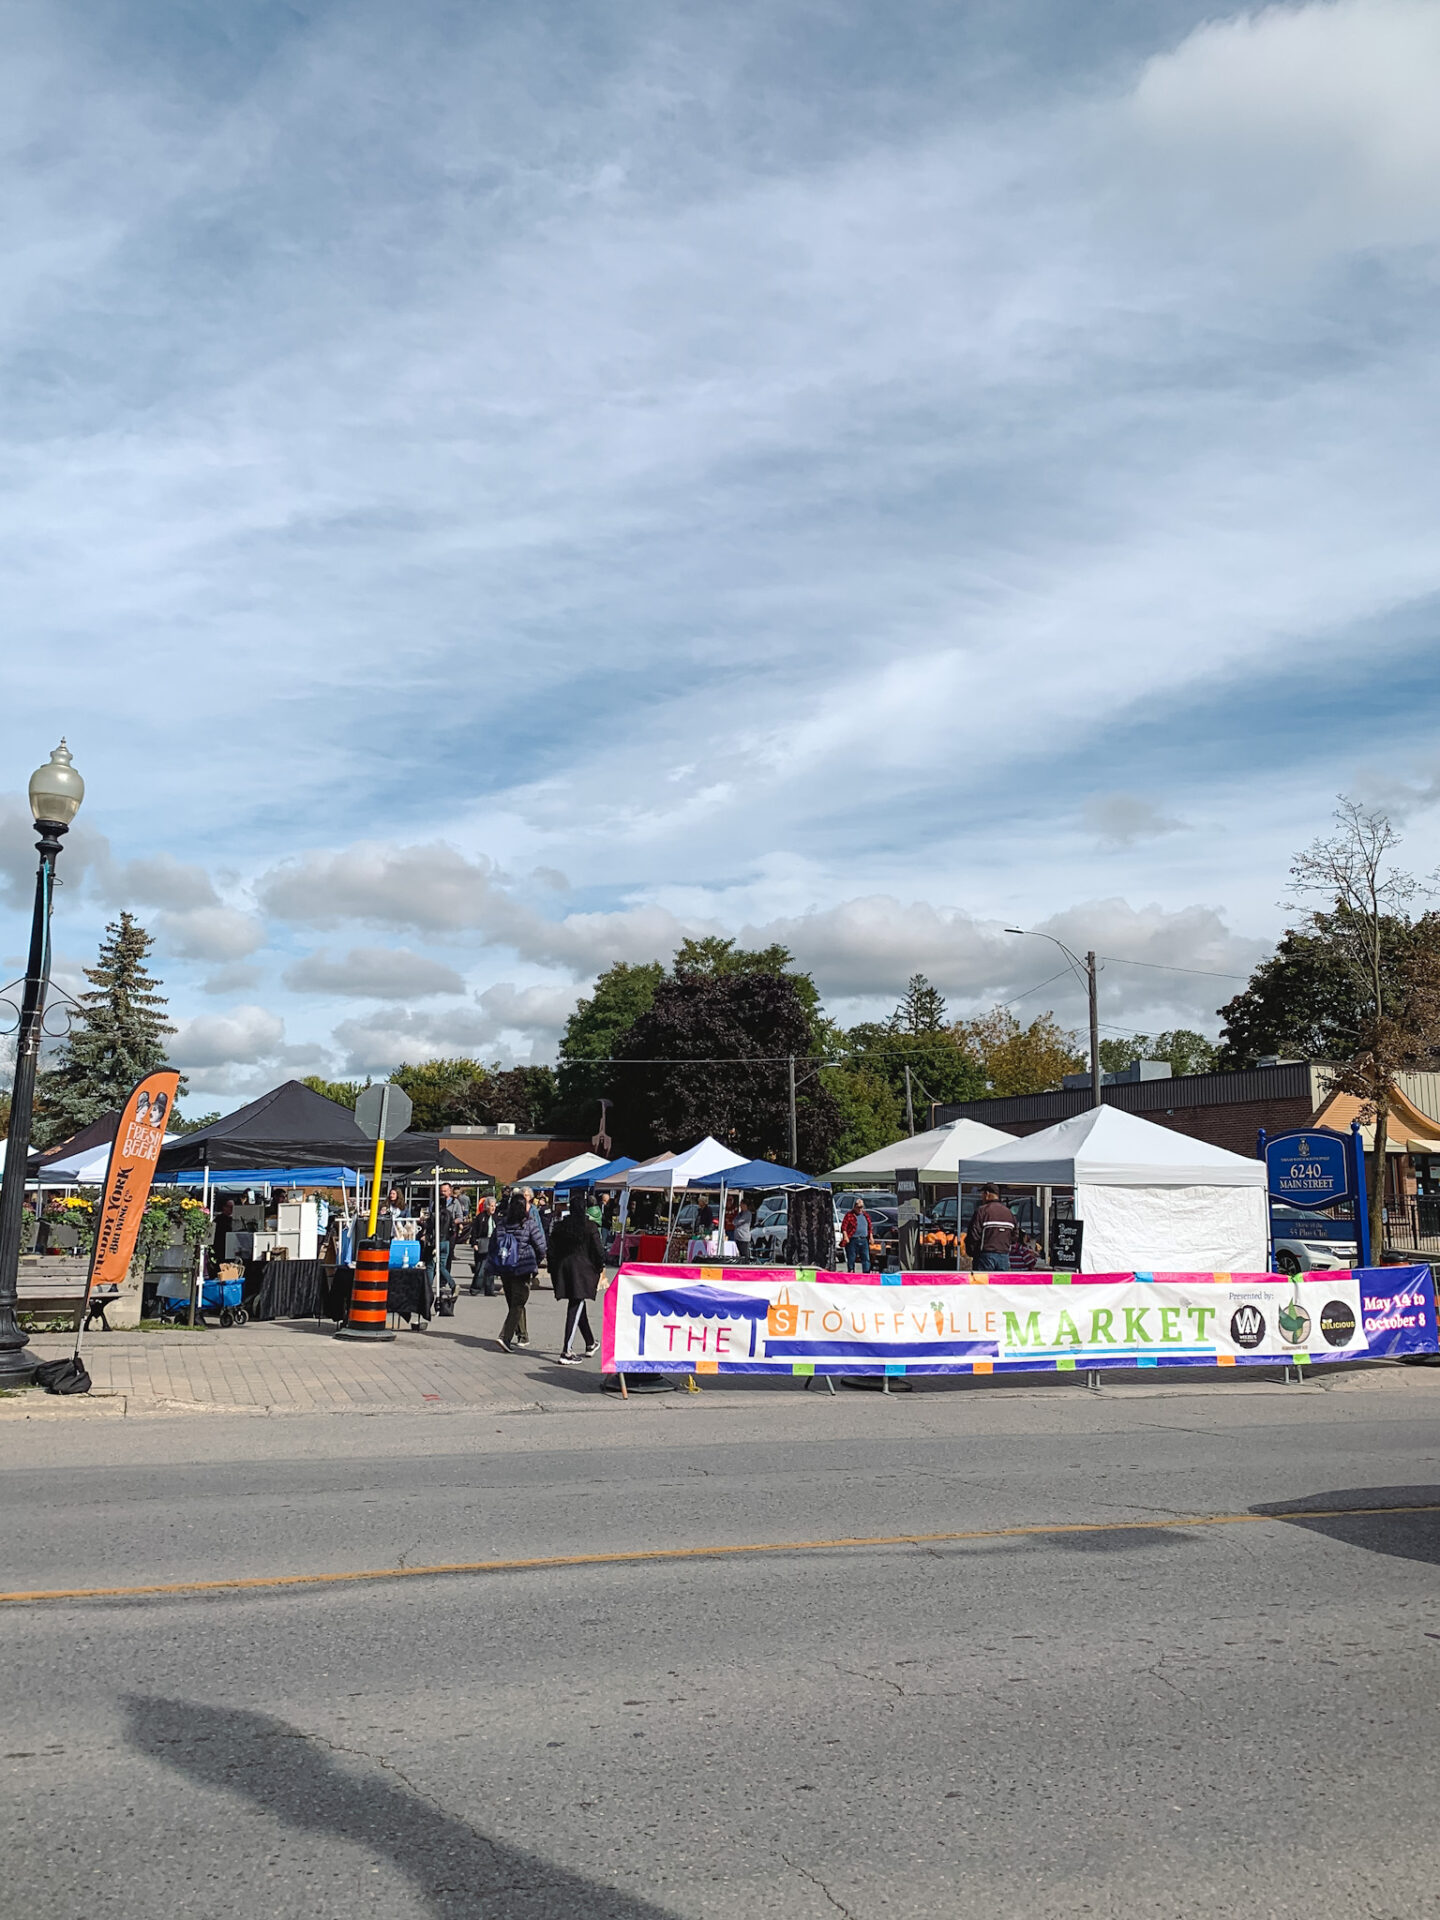 The Stouffville Market in Whitchurch-Stouffville, Ontario